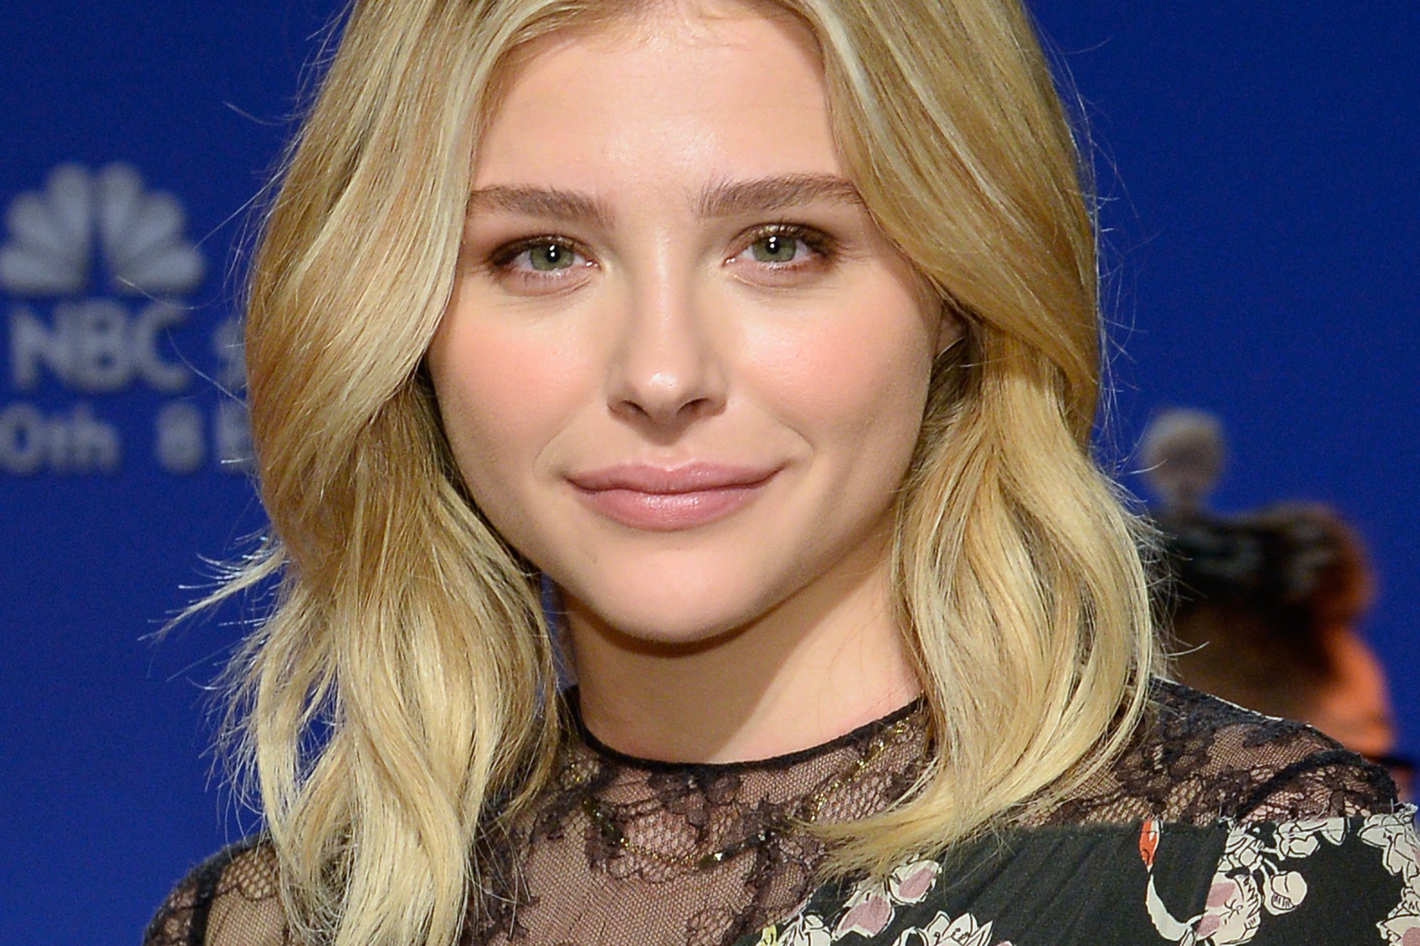 Chloe Grace Moretz Gets Candid About Growing Up Famous And